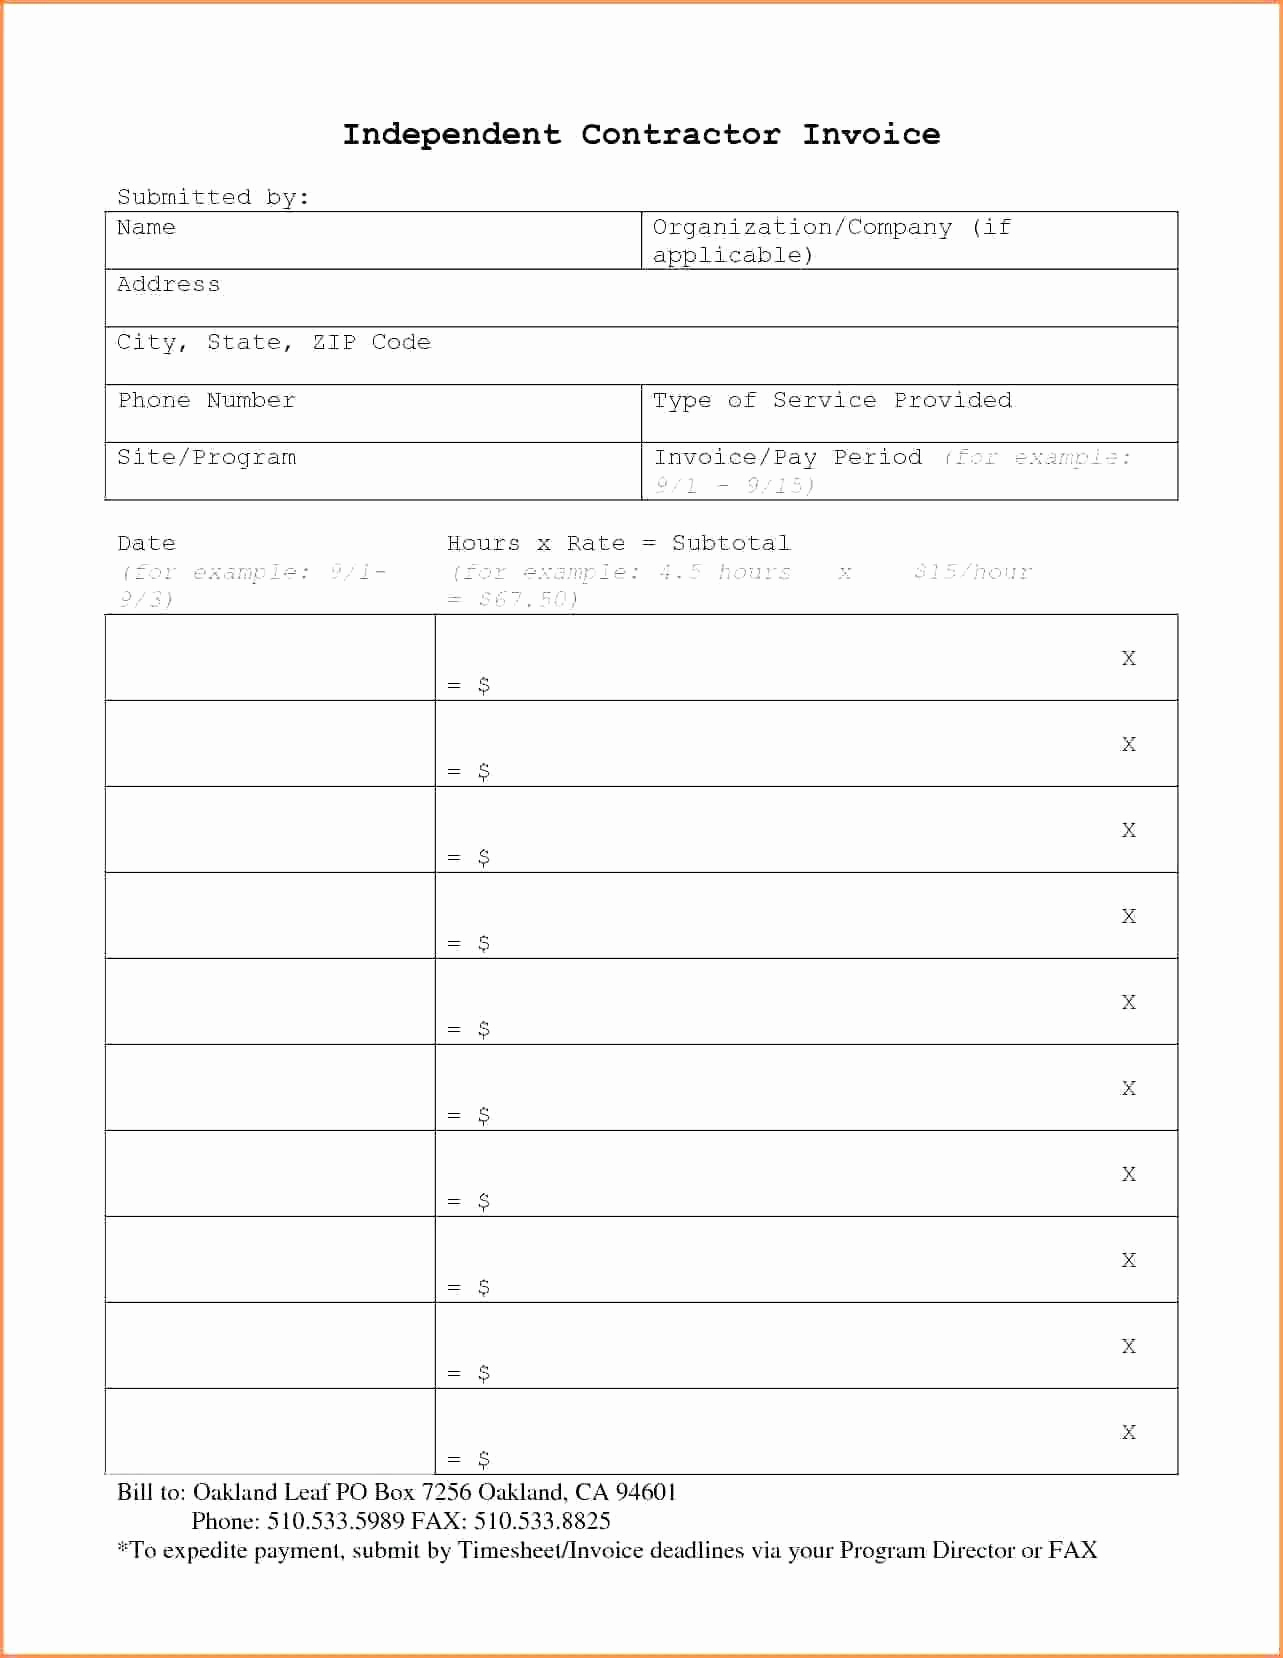 Electrical Contractor Invoice Template Inspirational Independent Contractor Invoice Template Electrical forms